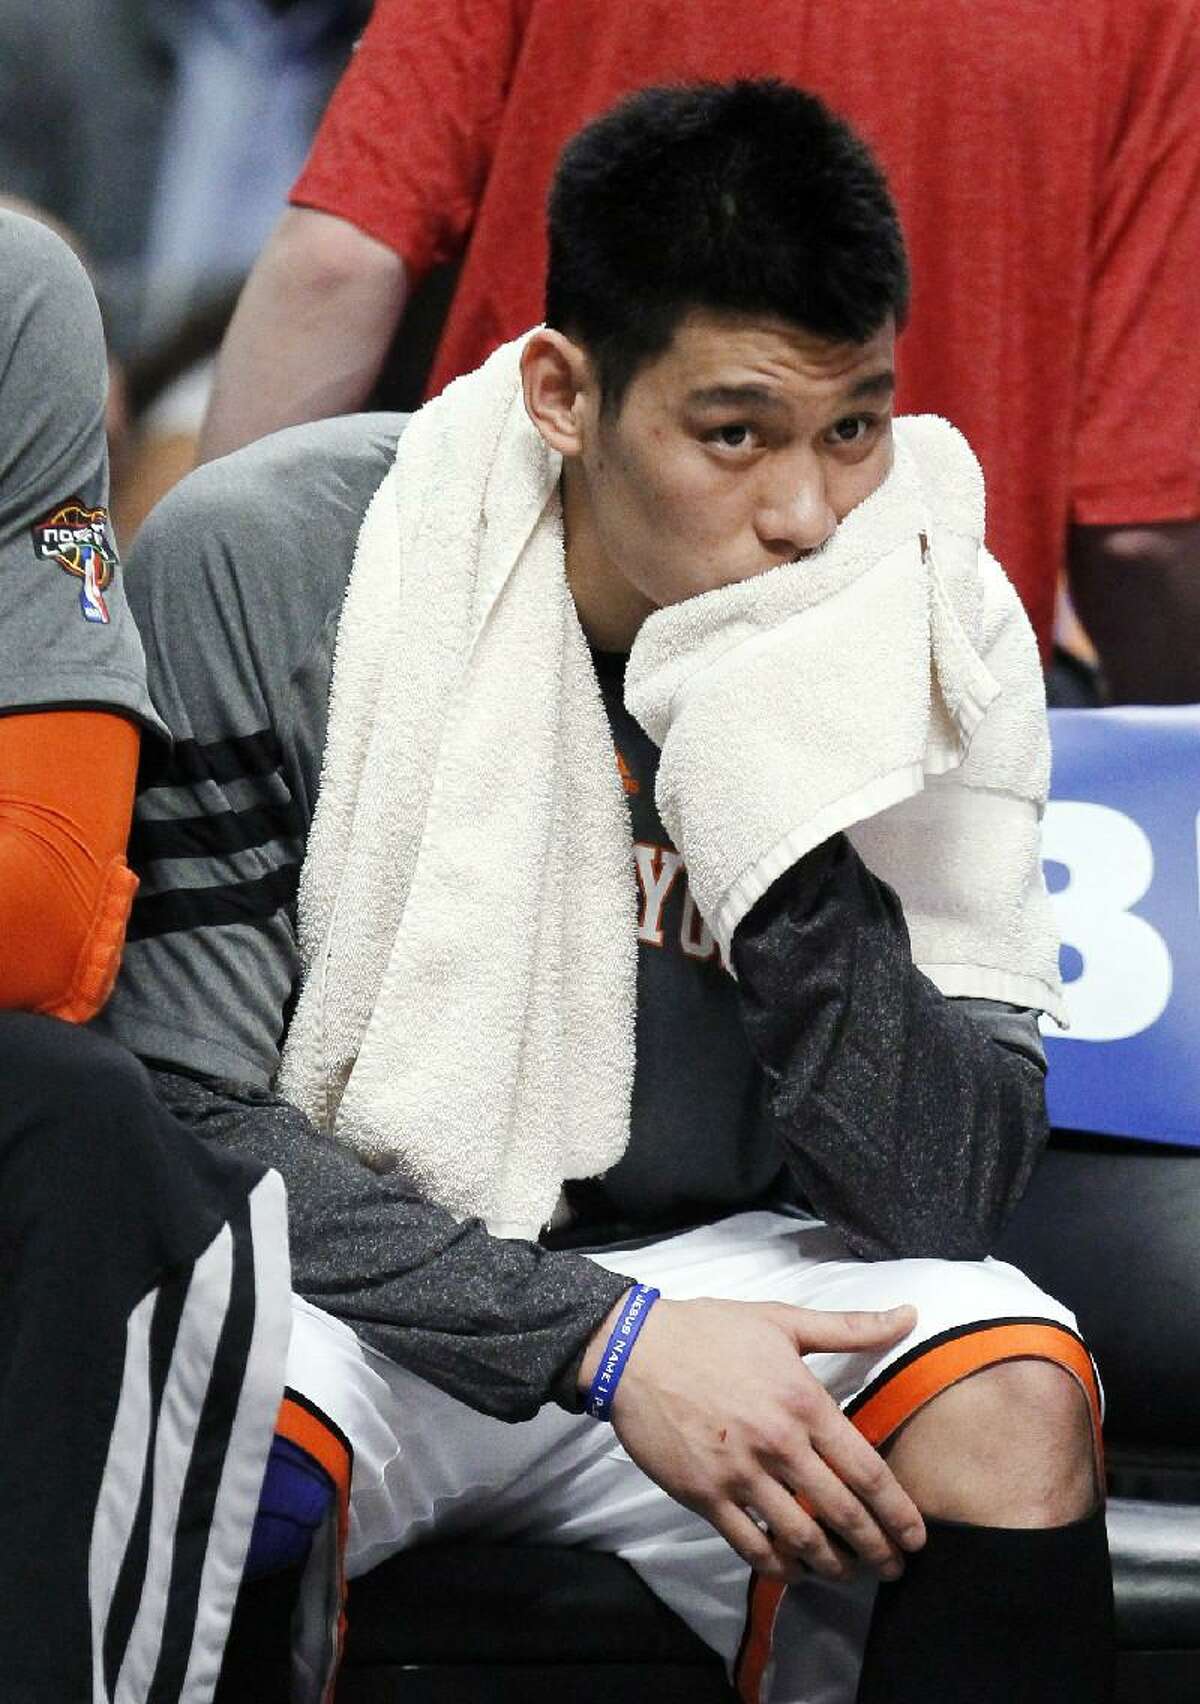 ASSOCIATED PRESS In this March 12 file photo, New York Knicks guard Jeremy Lin sits on the bench during the first half of a game against the Chicago Bulls in Chicago. Lin is having left knee surgery and will miss six weeks, likely ending his amazing breakthrough season. The team said Saturday that the point guard had an MRI exam this week that revealed a small, chronic meniscus tear.